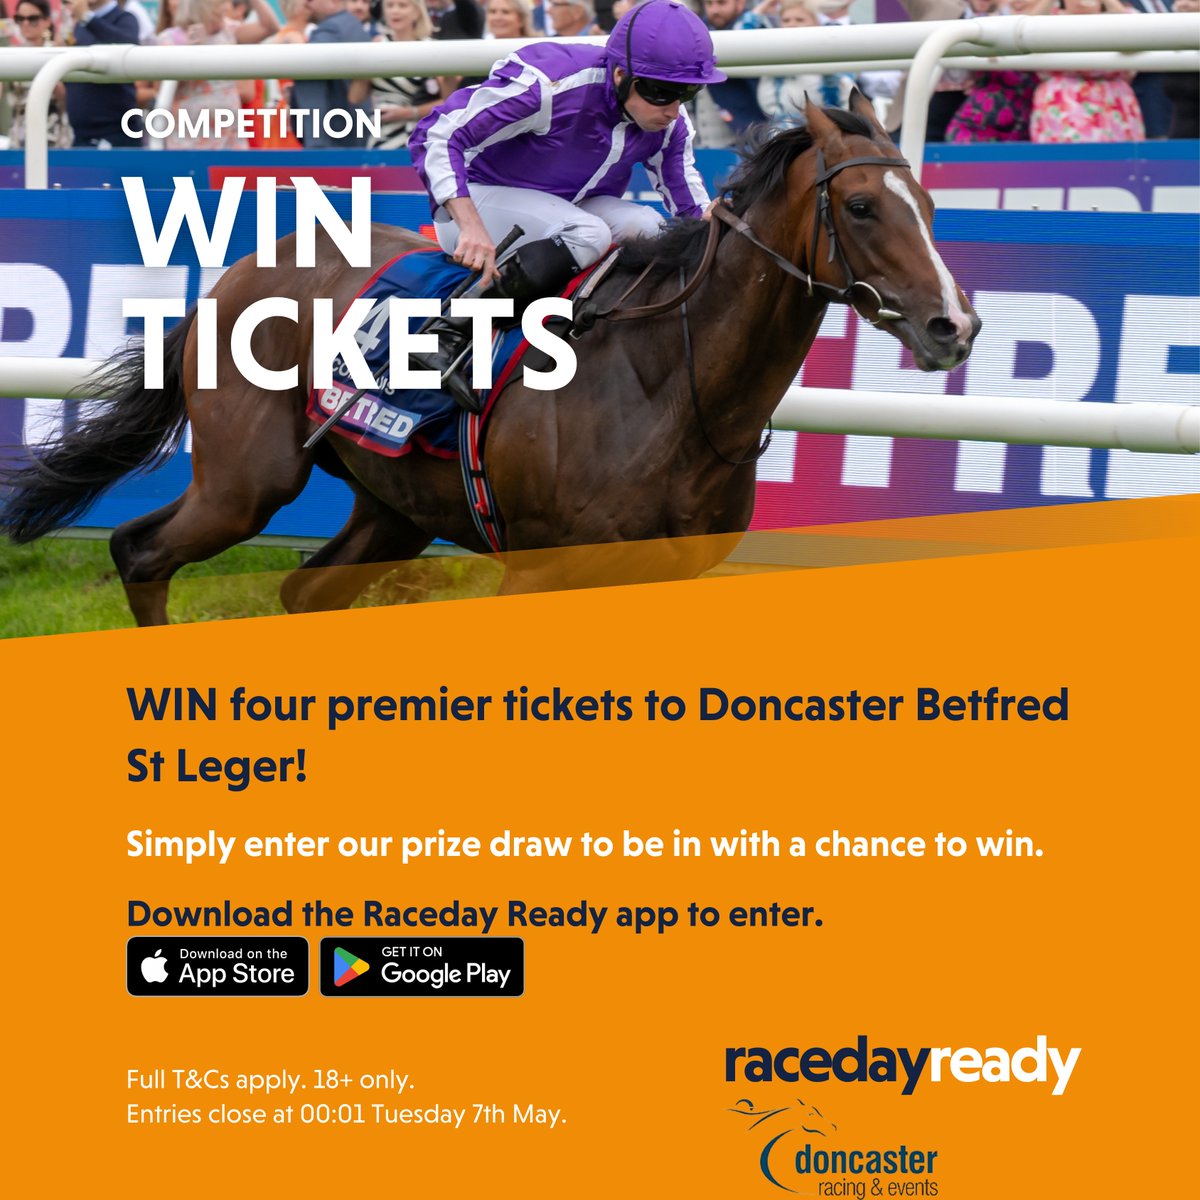 🎉 𝐂𝐎𝐌𝐏𝐄𝐓𝐈𝐓𝐈𝐎𝐍 𝐓𝐈𝐌𝐄 🎉 Our friends at @Raceday_Ready are giving you the chance to win four tickets to a selection of fixtures between June and December, including Betfred St Leger Day 😍 Enter now ➡️ brnw.ch/21wIEKl #DoncasterRaces | #ChampionOccasions